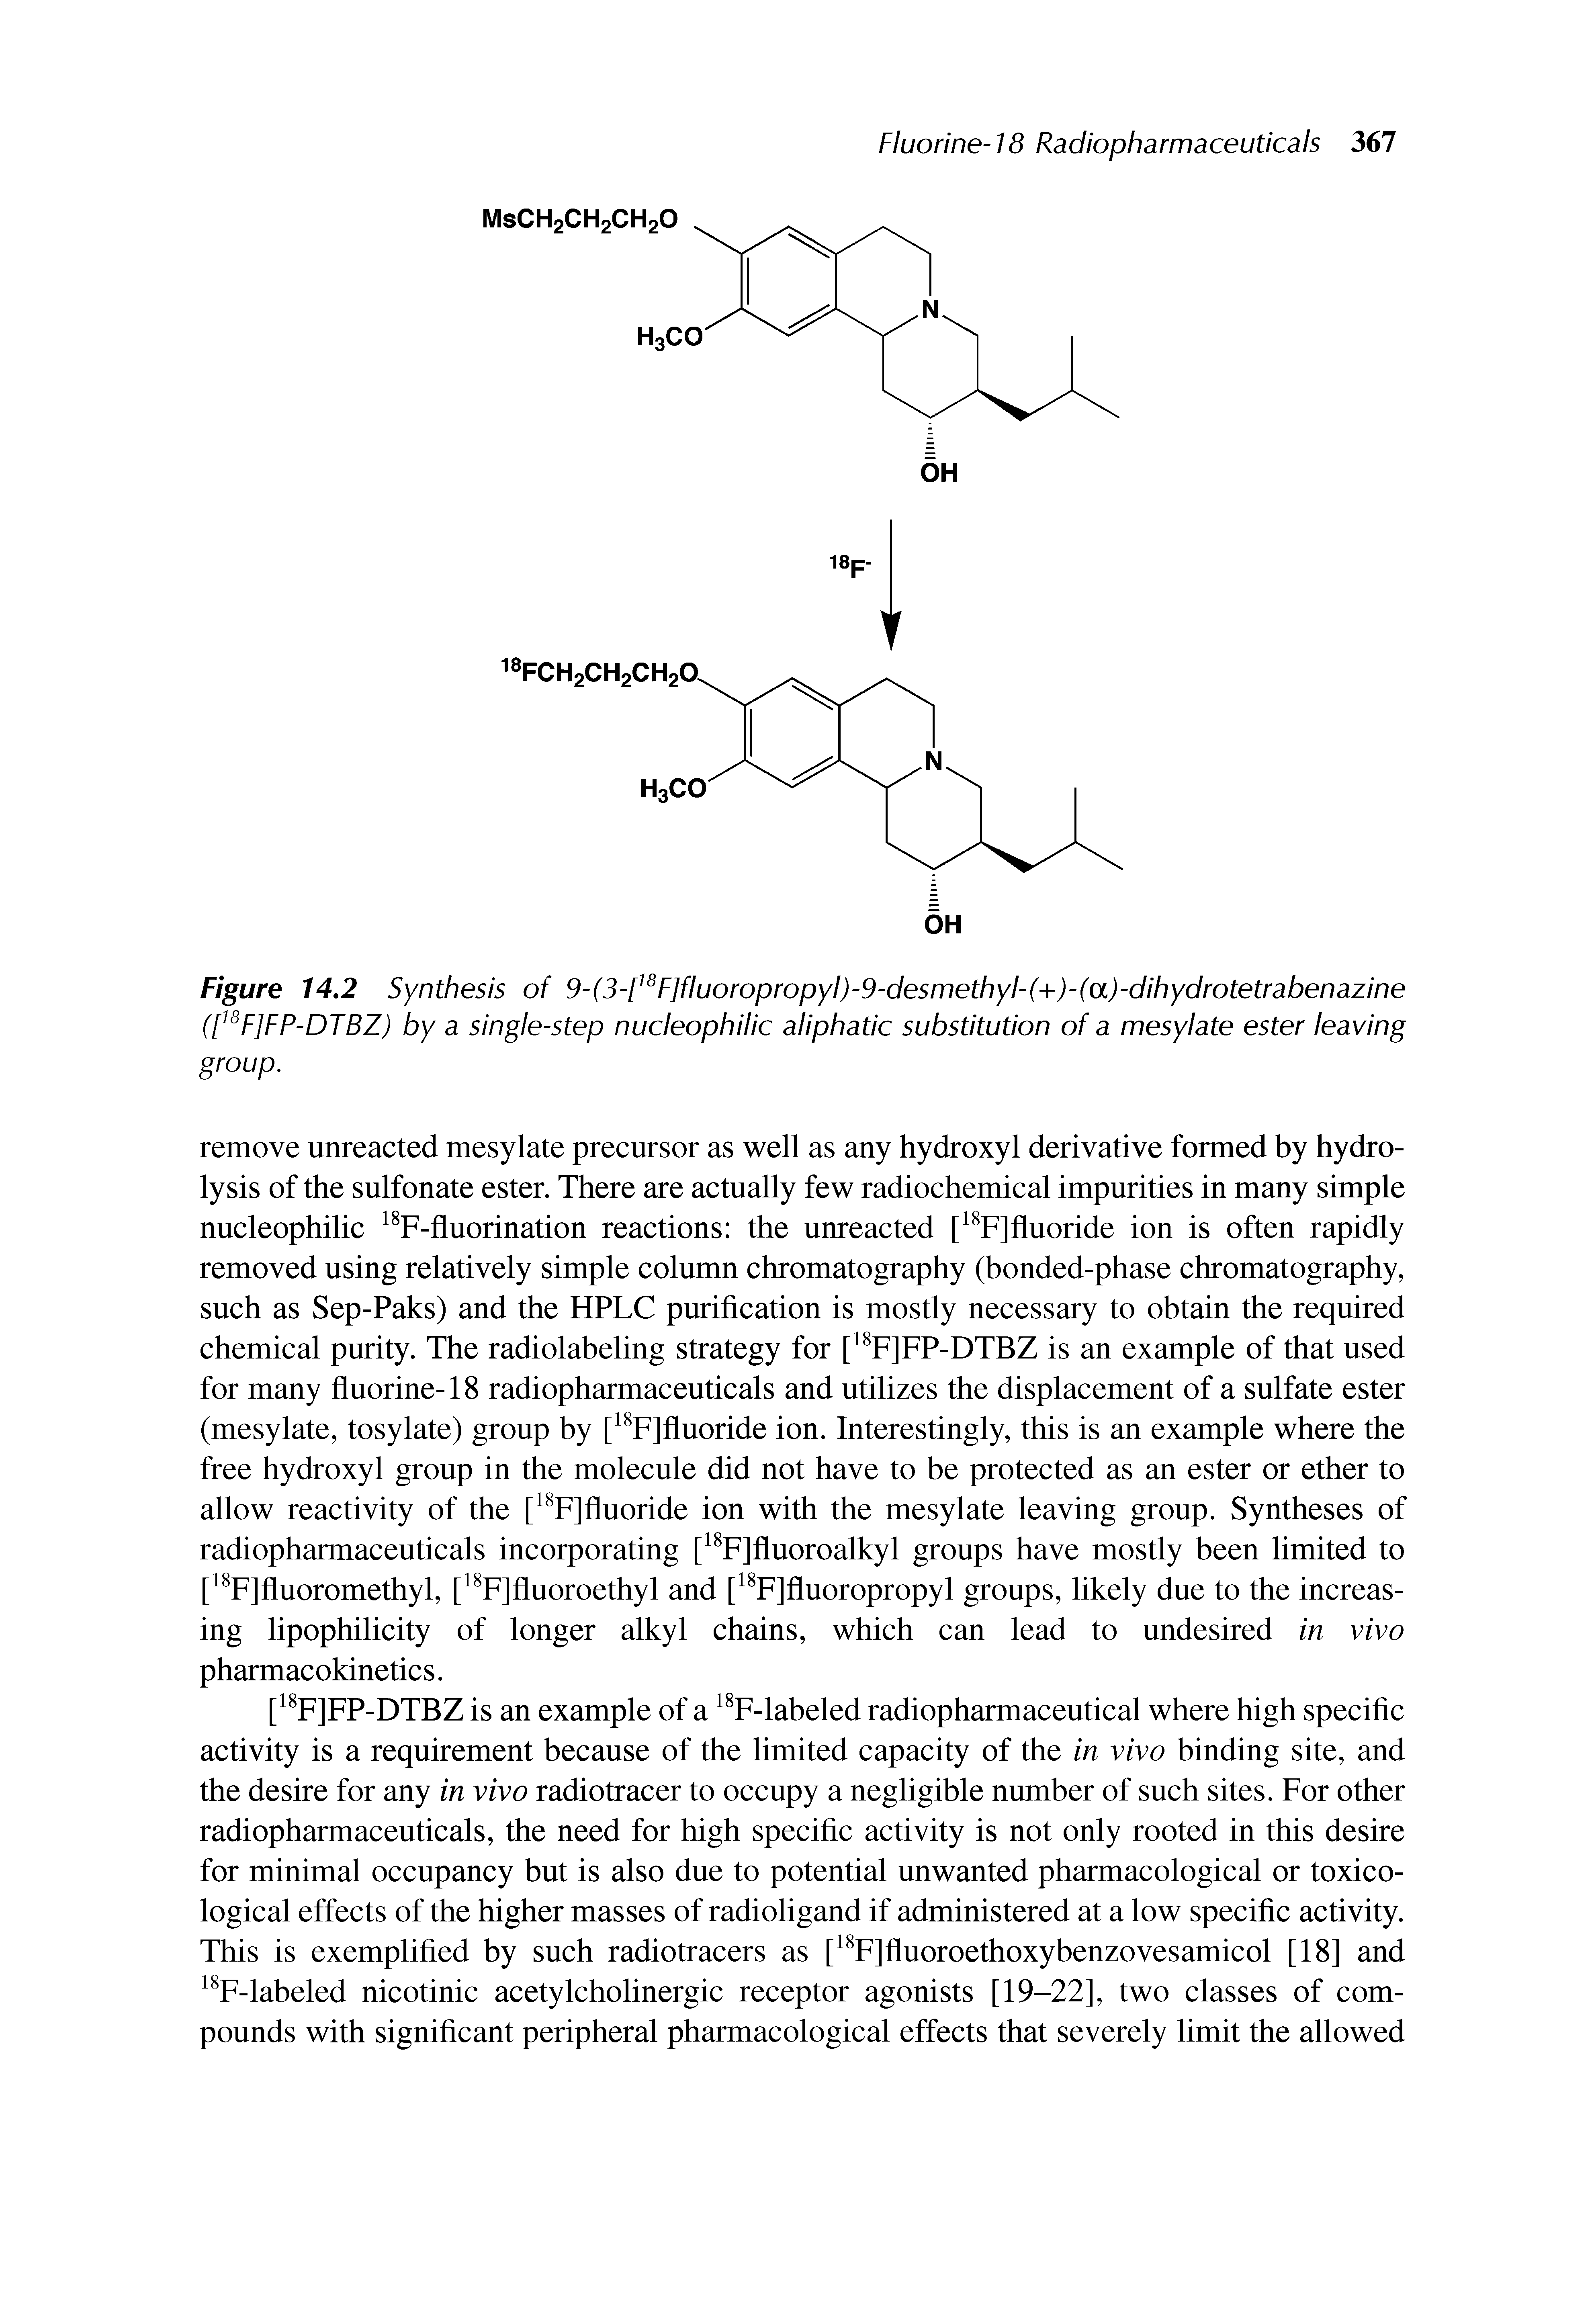 Figure 14.2 Synthesis of 9-(3-[18F]fluoropropyl)-9-desmethyF(+)-(a)-dihydrotetrabenazine (f18F]FP-DTBZ) by a single-step nucleophilic aliphatic substitution of a mesylate ester leaving group.